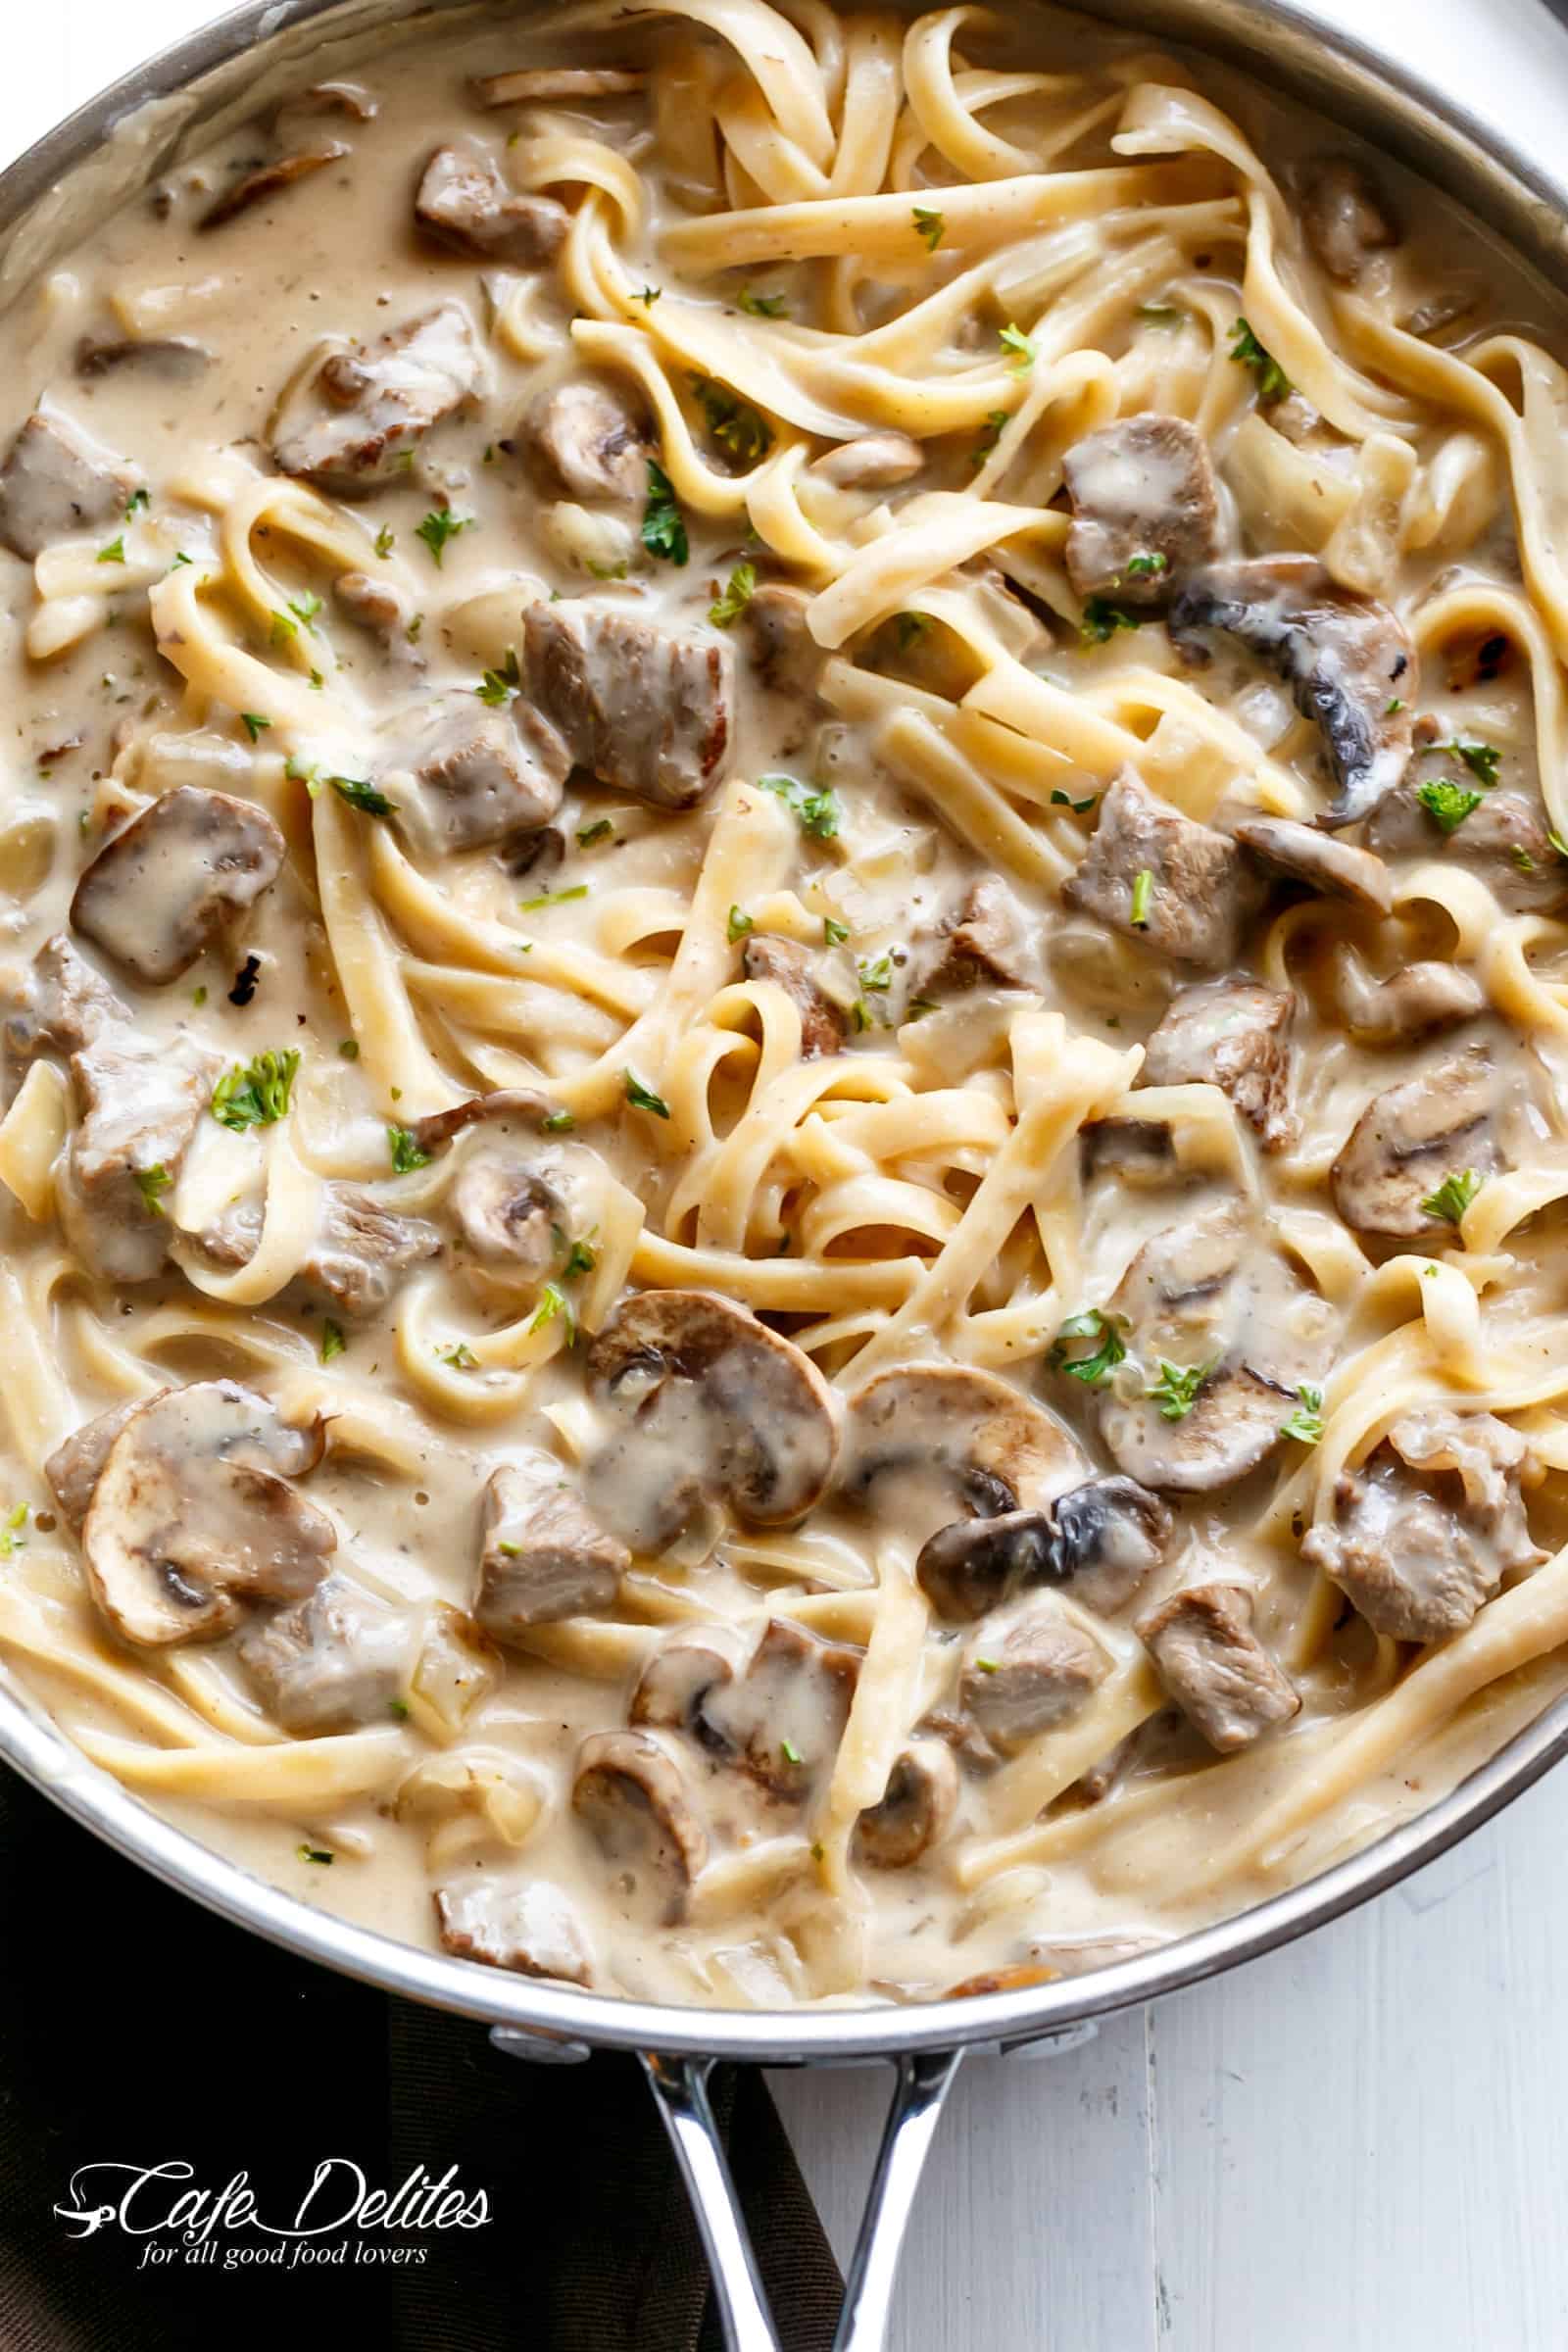 Creamy Beef and Mushroom Stroganoff is ready and on the table in less than 20 minutes! Your family will go crazy thinking there's a hidden chef in your kitchen! | cafedelites.com